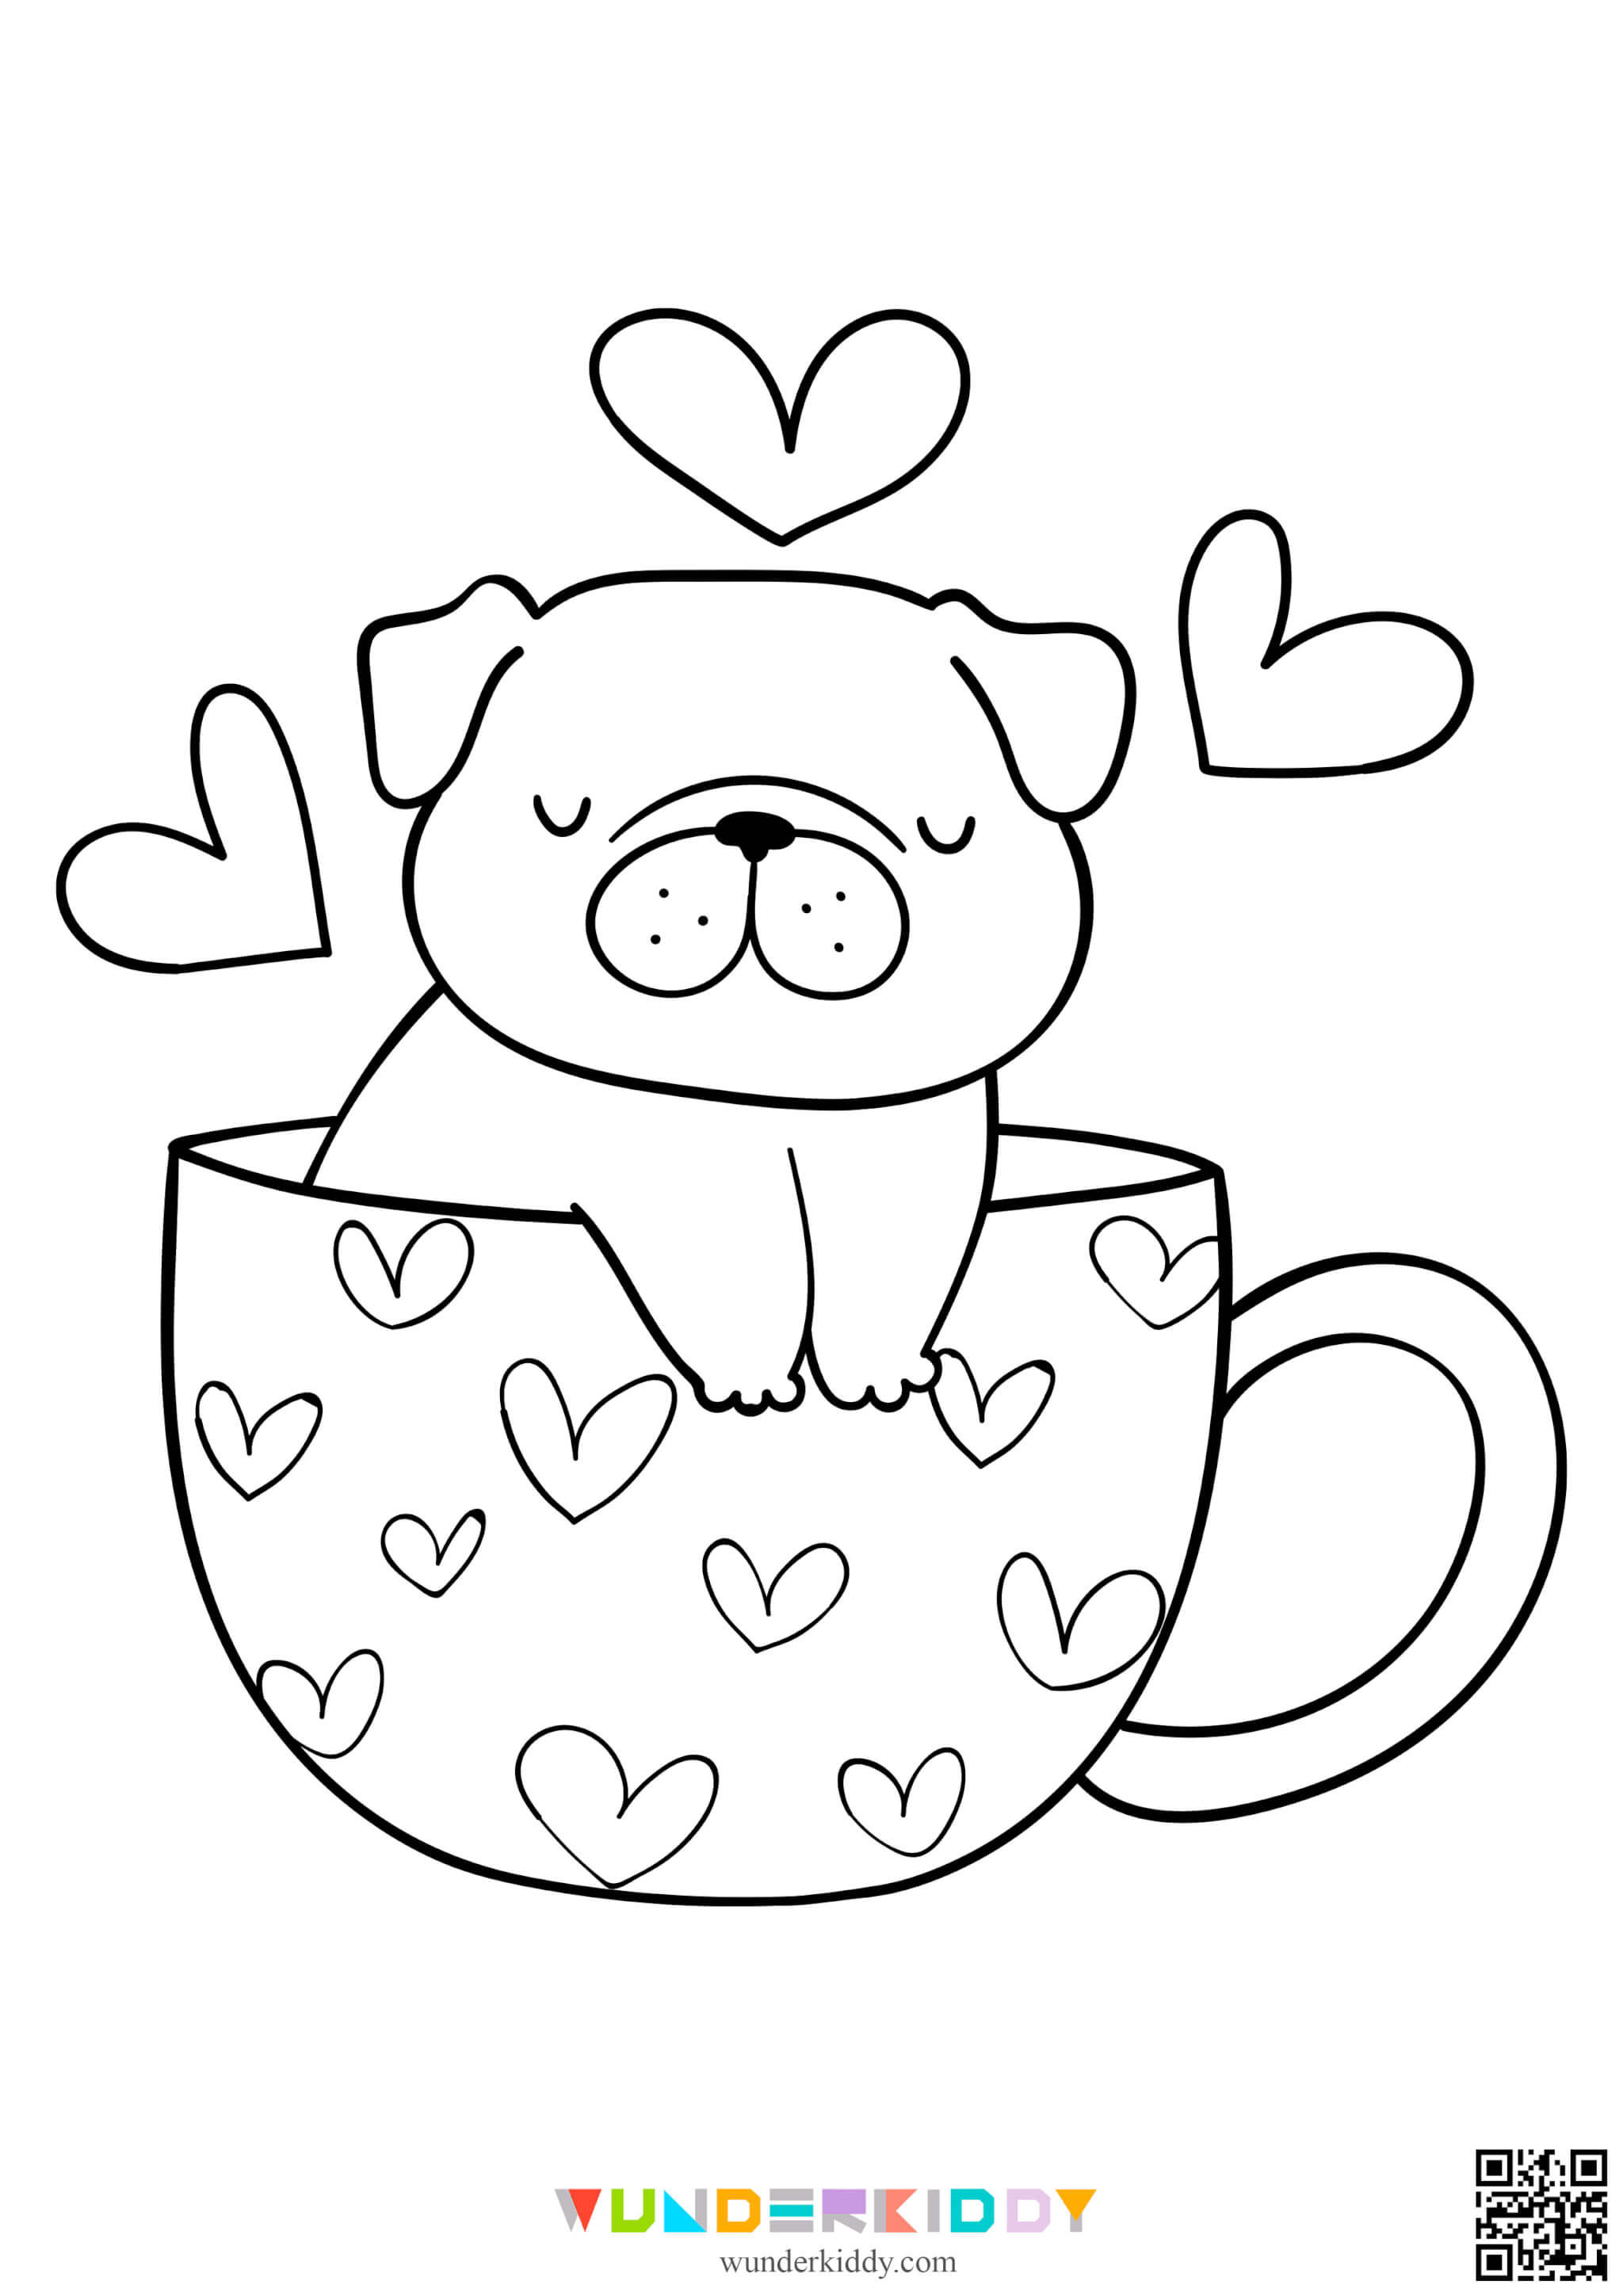 Valentines Coloring Pages - Image 8